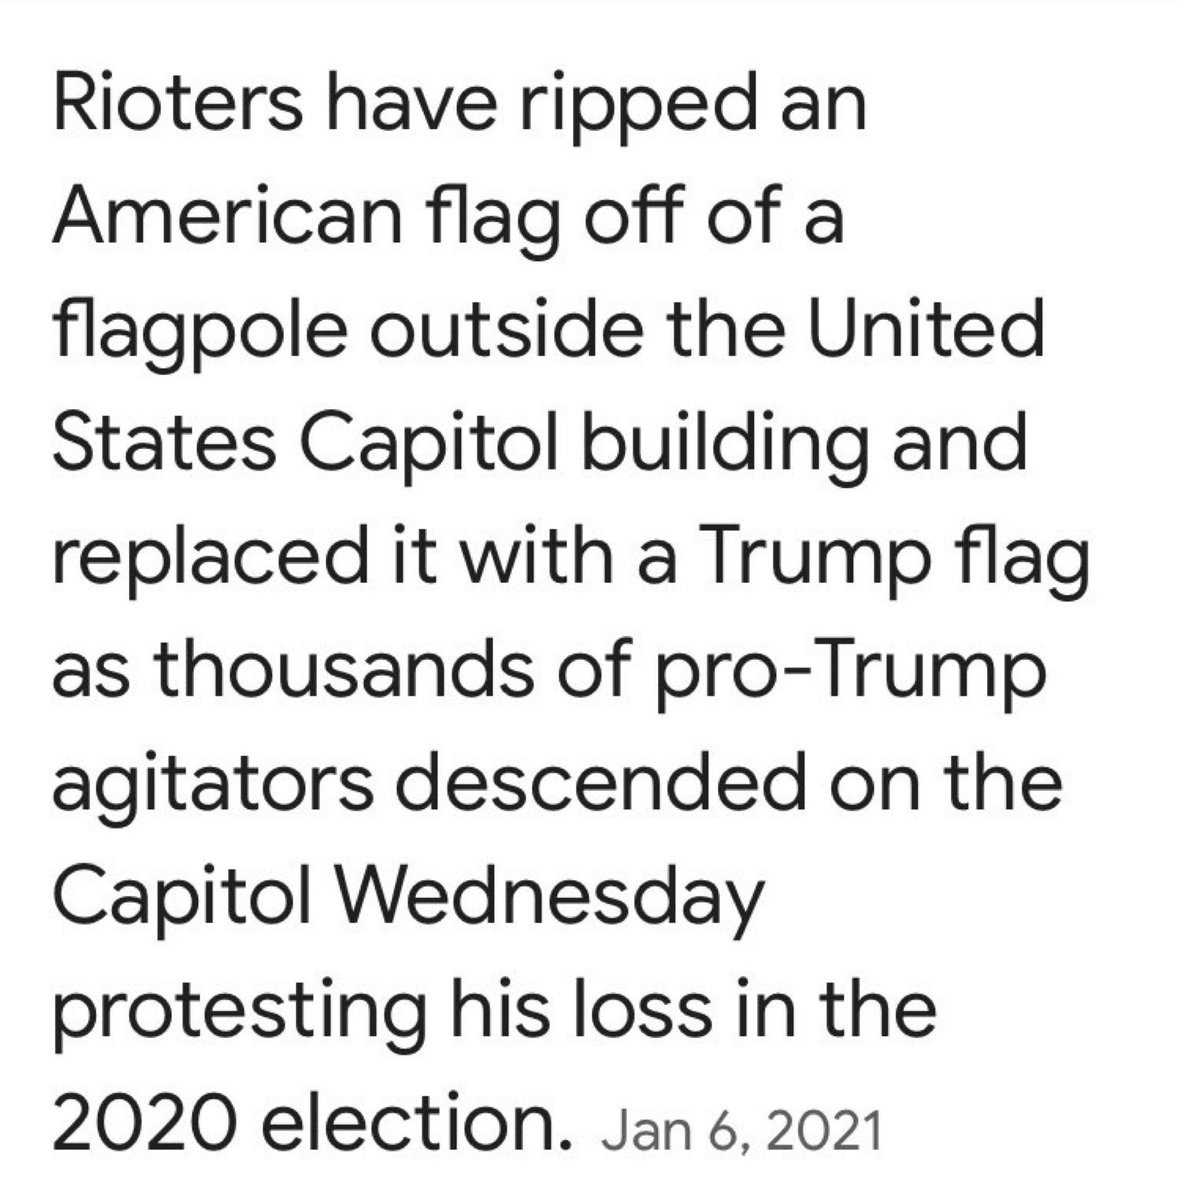 So much for MAGA calling themselves patriots or saying they love America — If you rip the American flag you just identified yourself as a traitor, an insurrectionist, a domestic terrorist & a treasonous criminal. If you hate America you should move to Russia.